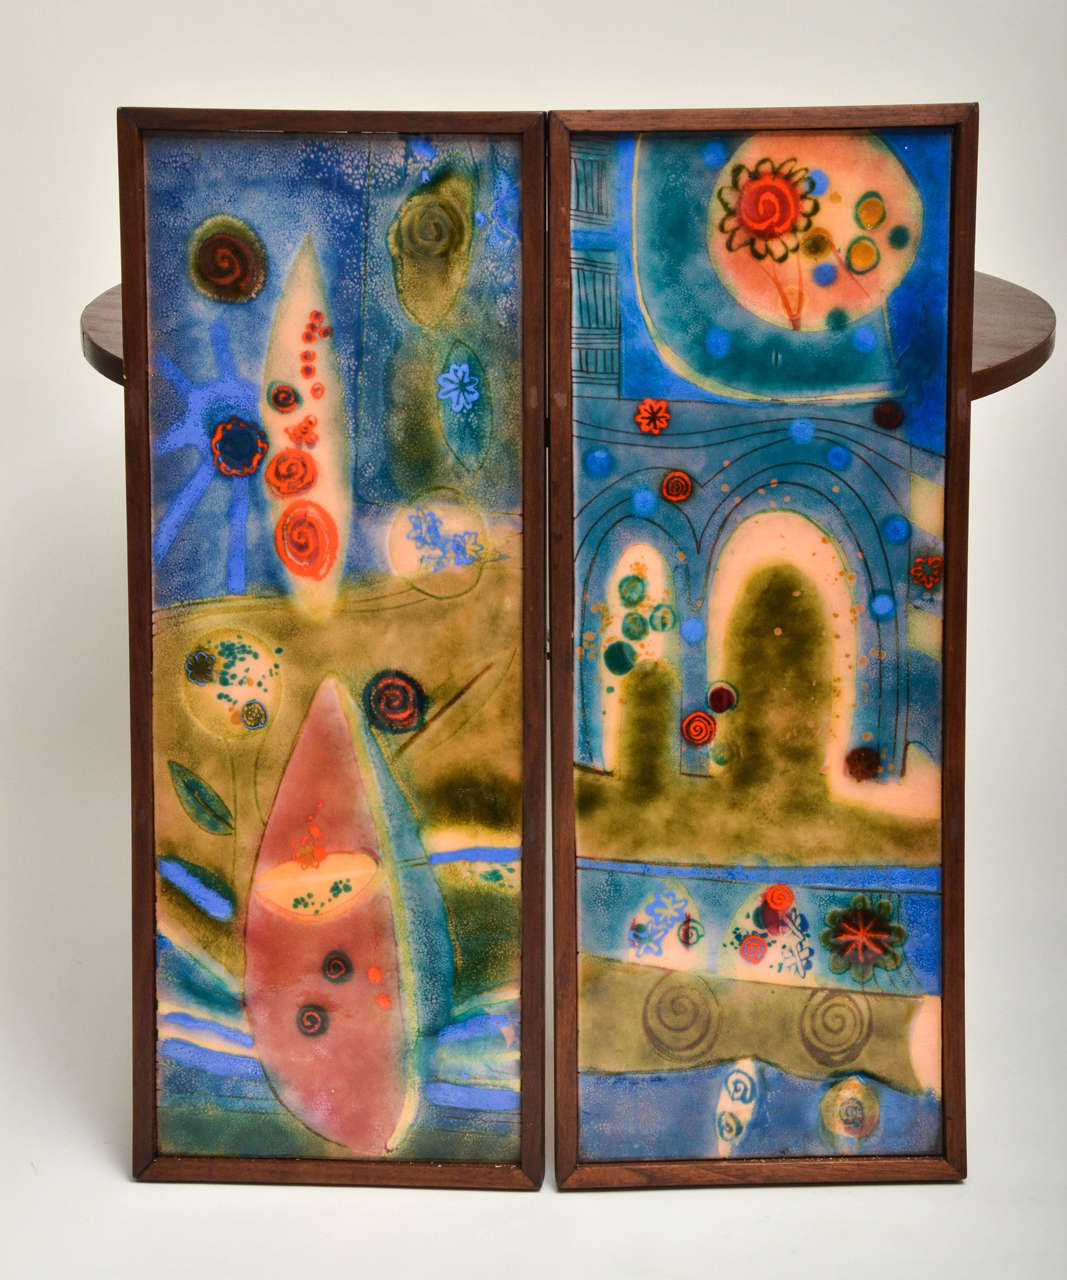 Colorful pair of enamel on copper wall art in wood frame.